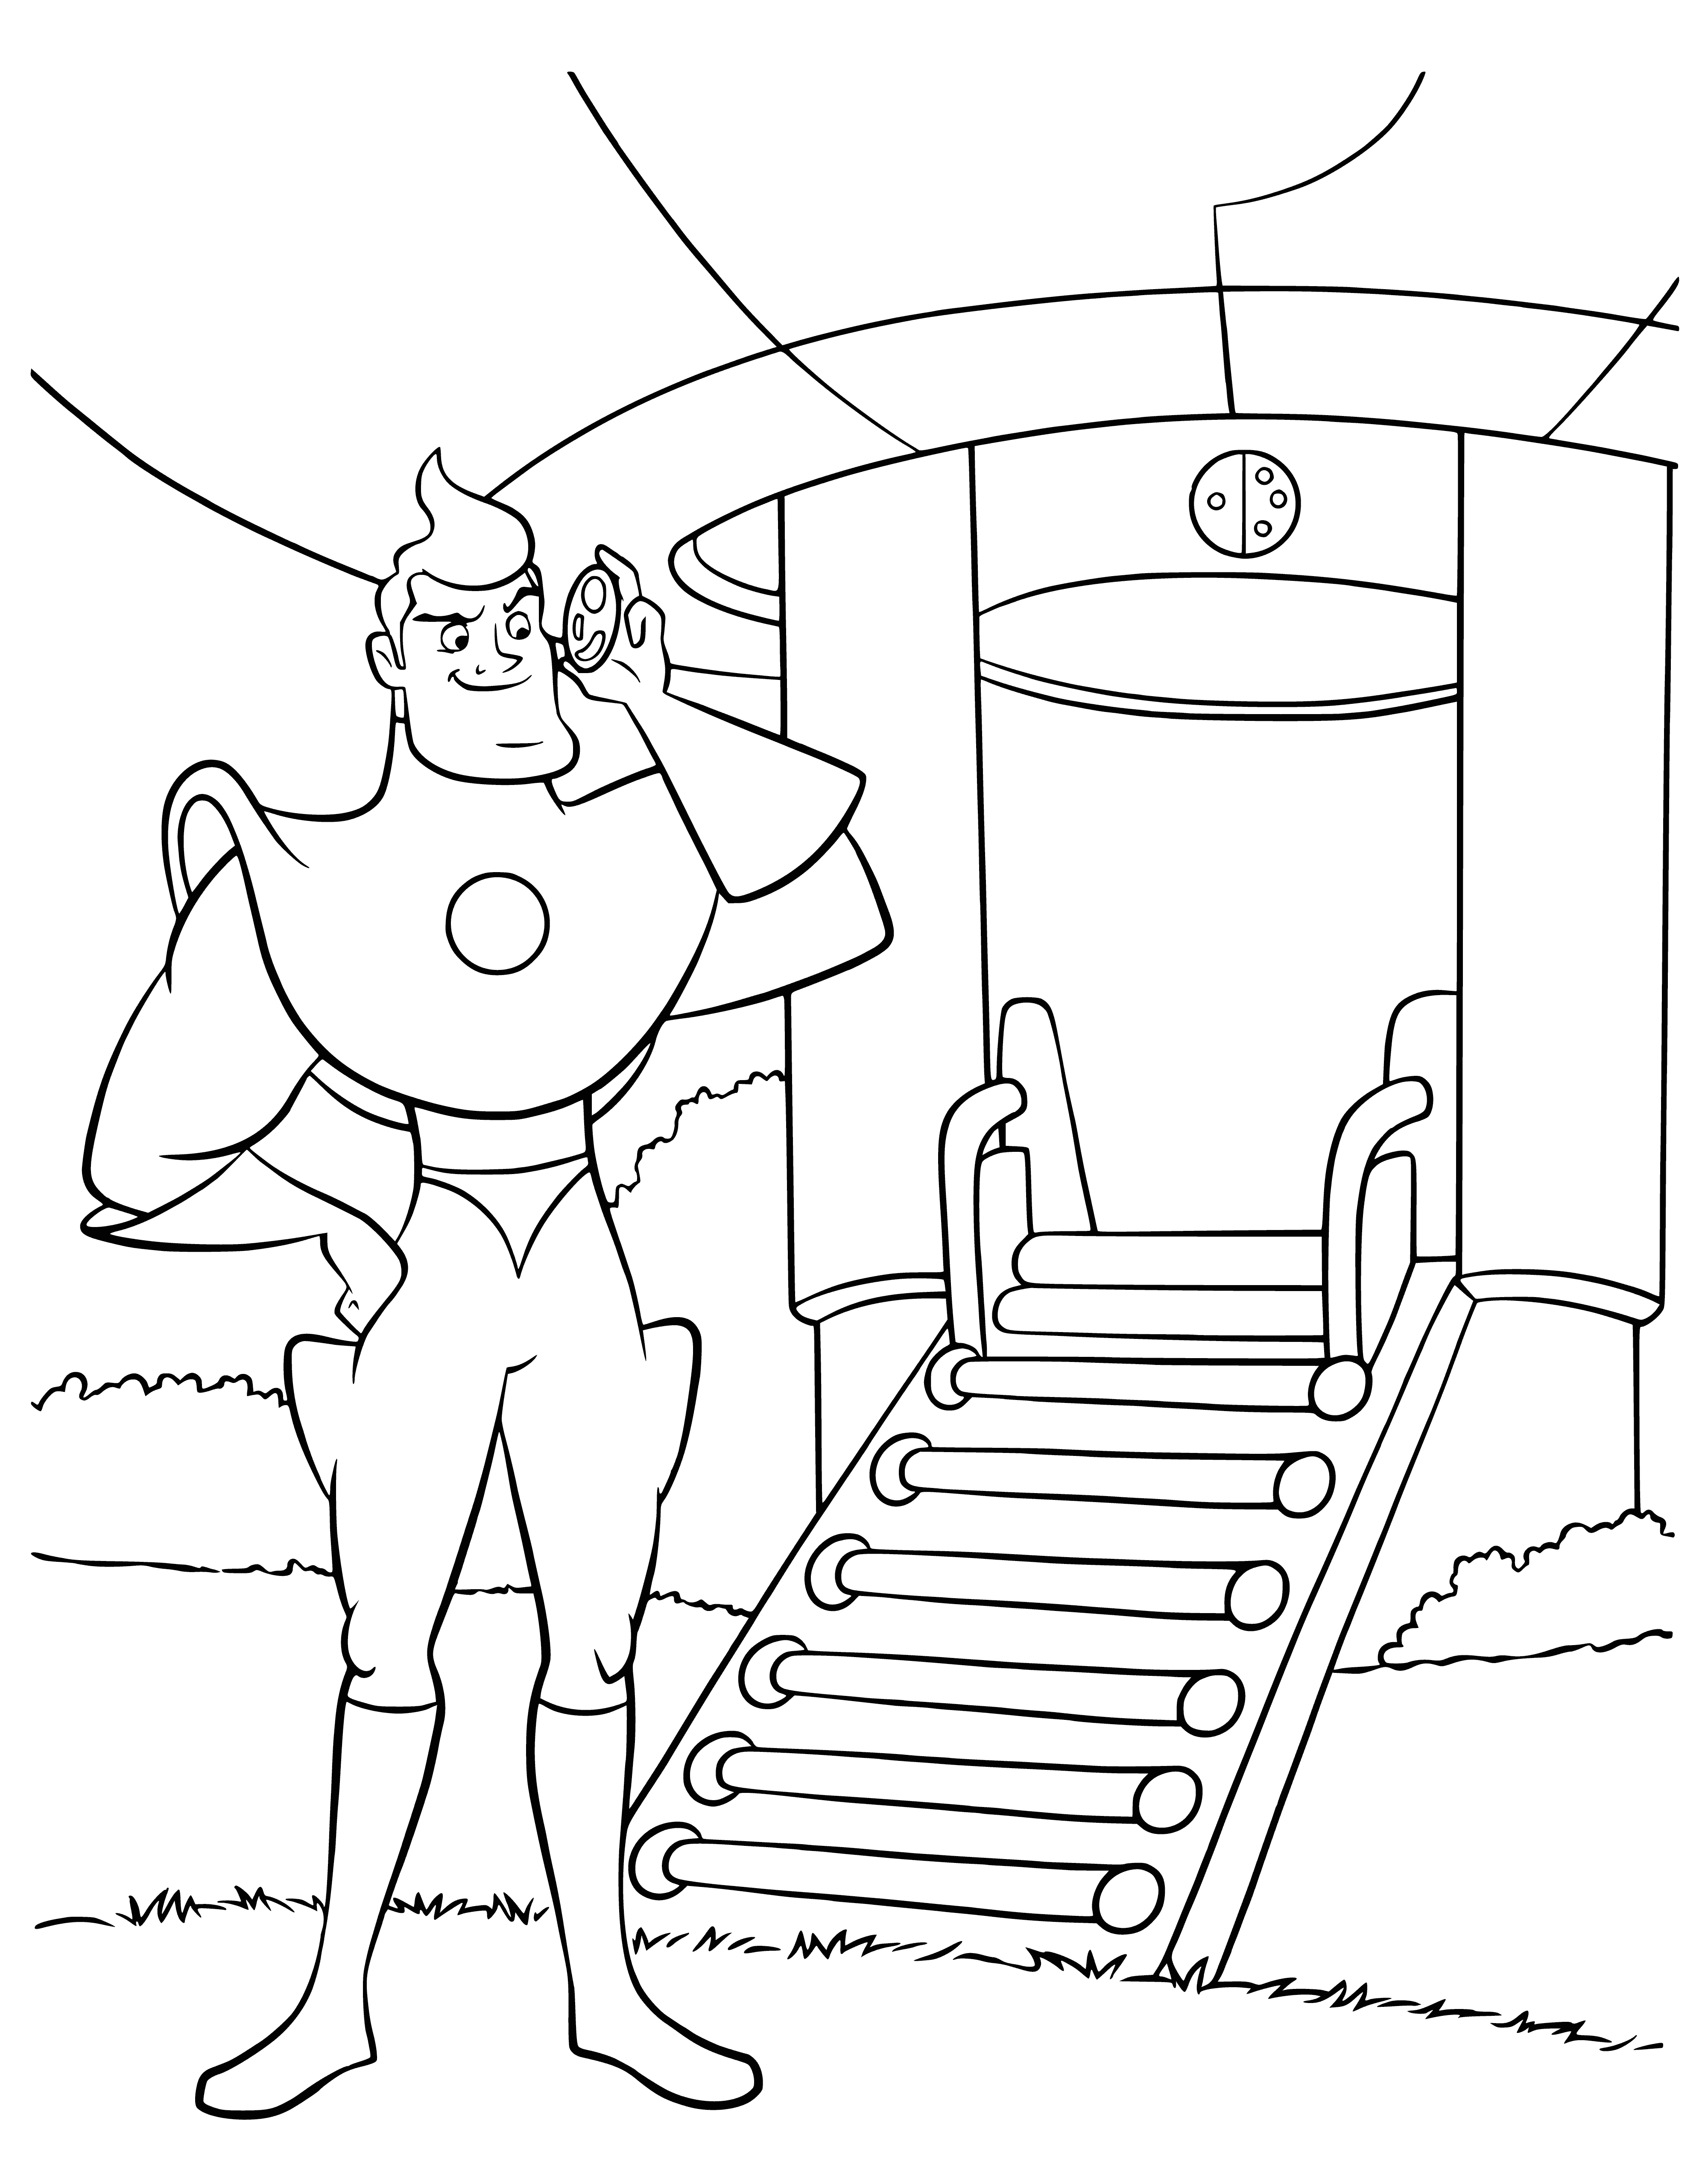 Good fellow coloring page